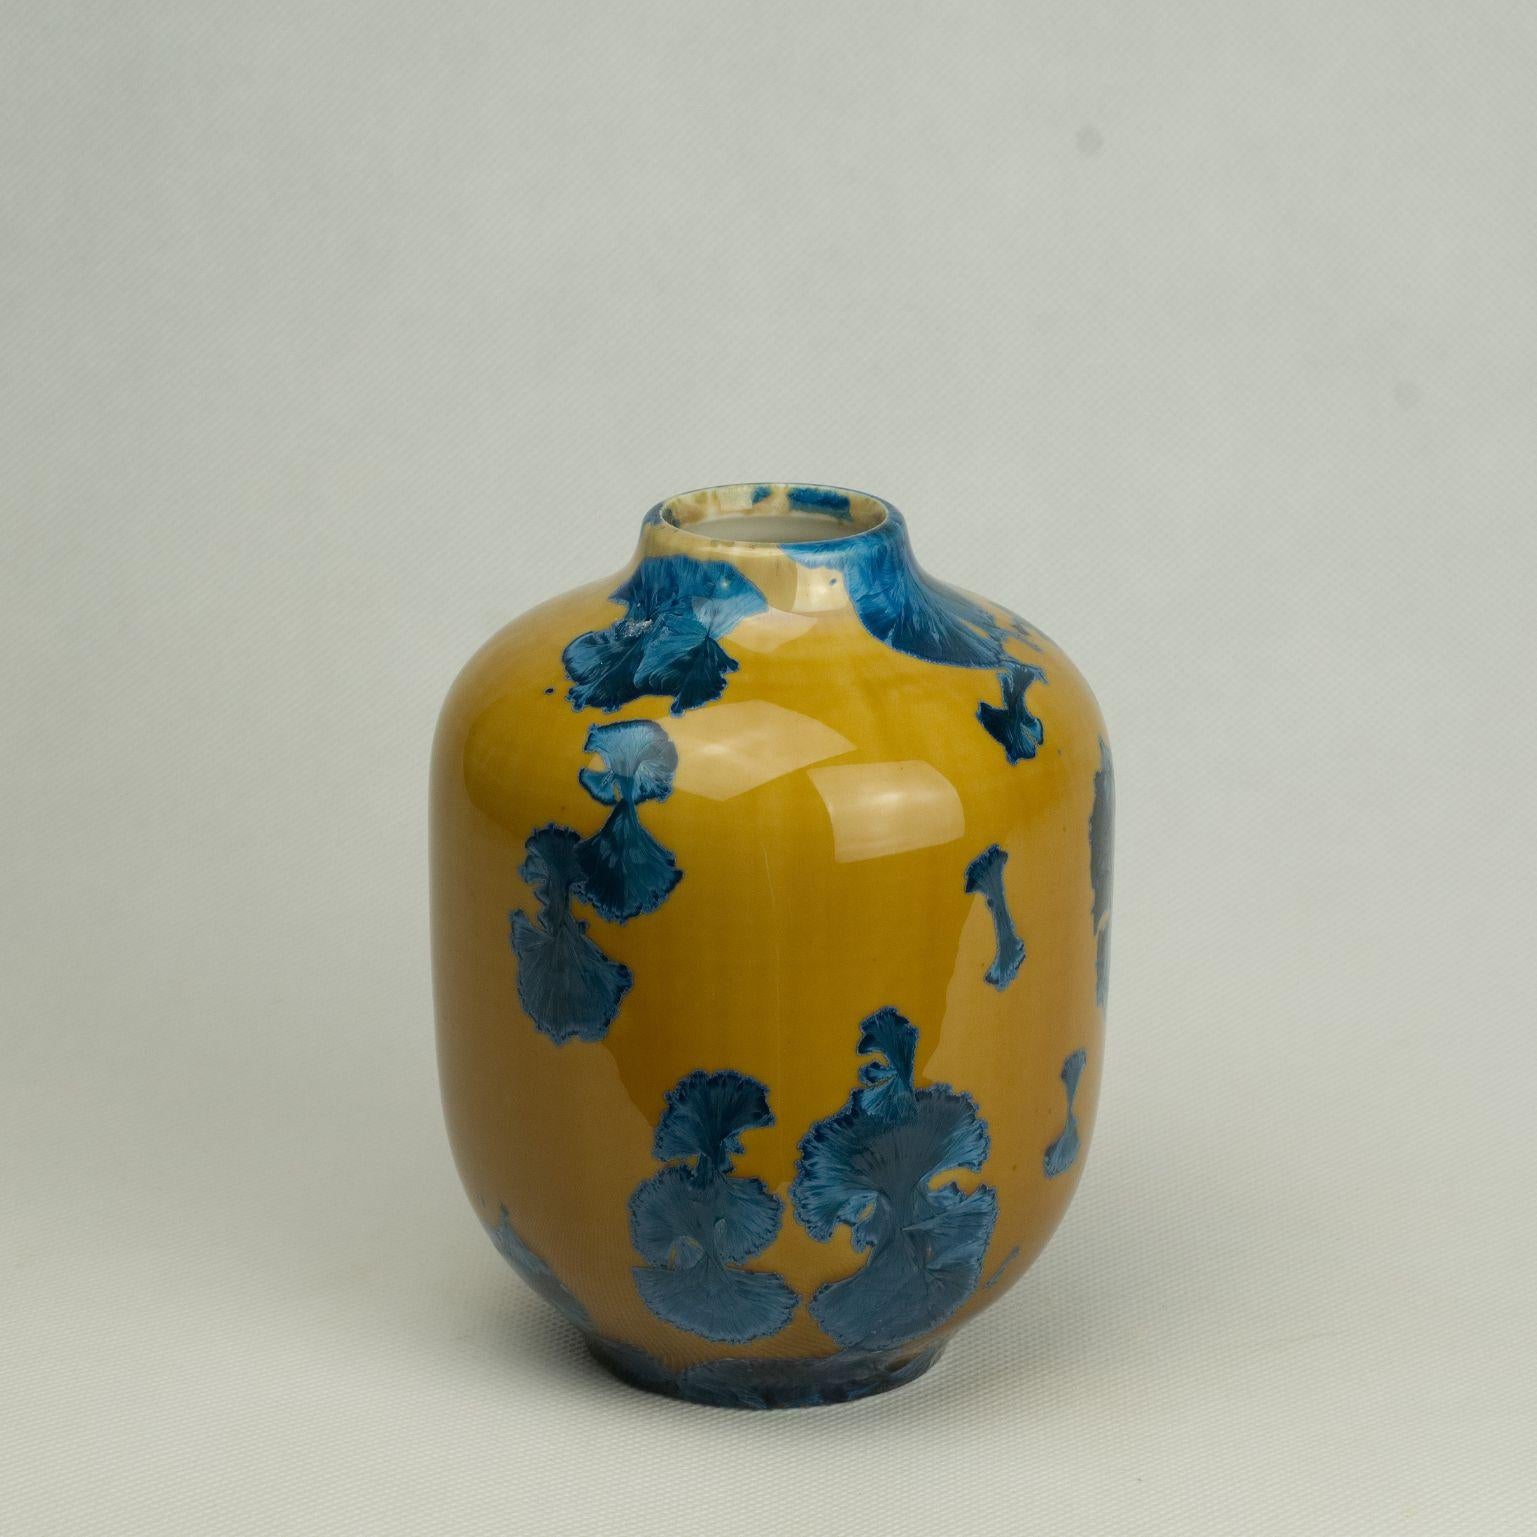 Volume 1 vase by Milan Pekar
Dimensions: D11 x H15 cm
Materials: Glaze, porcelain

Handmade in the Czech Republic. 

Also available: Different colors and patterns

Established own studio August 2009 – Focus mainly on porcelain, developing